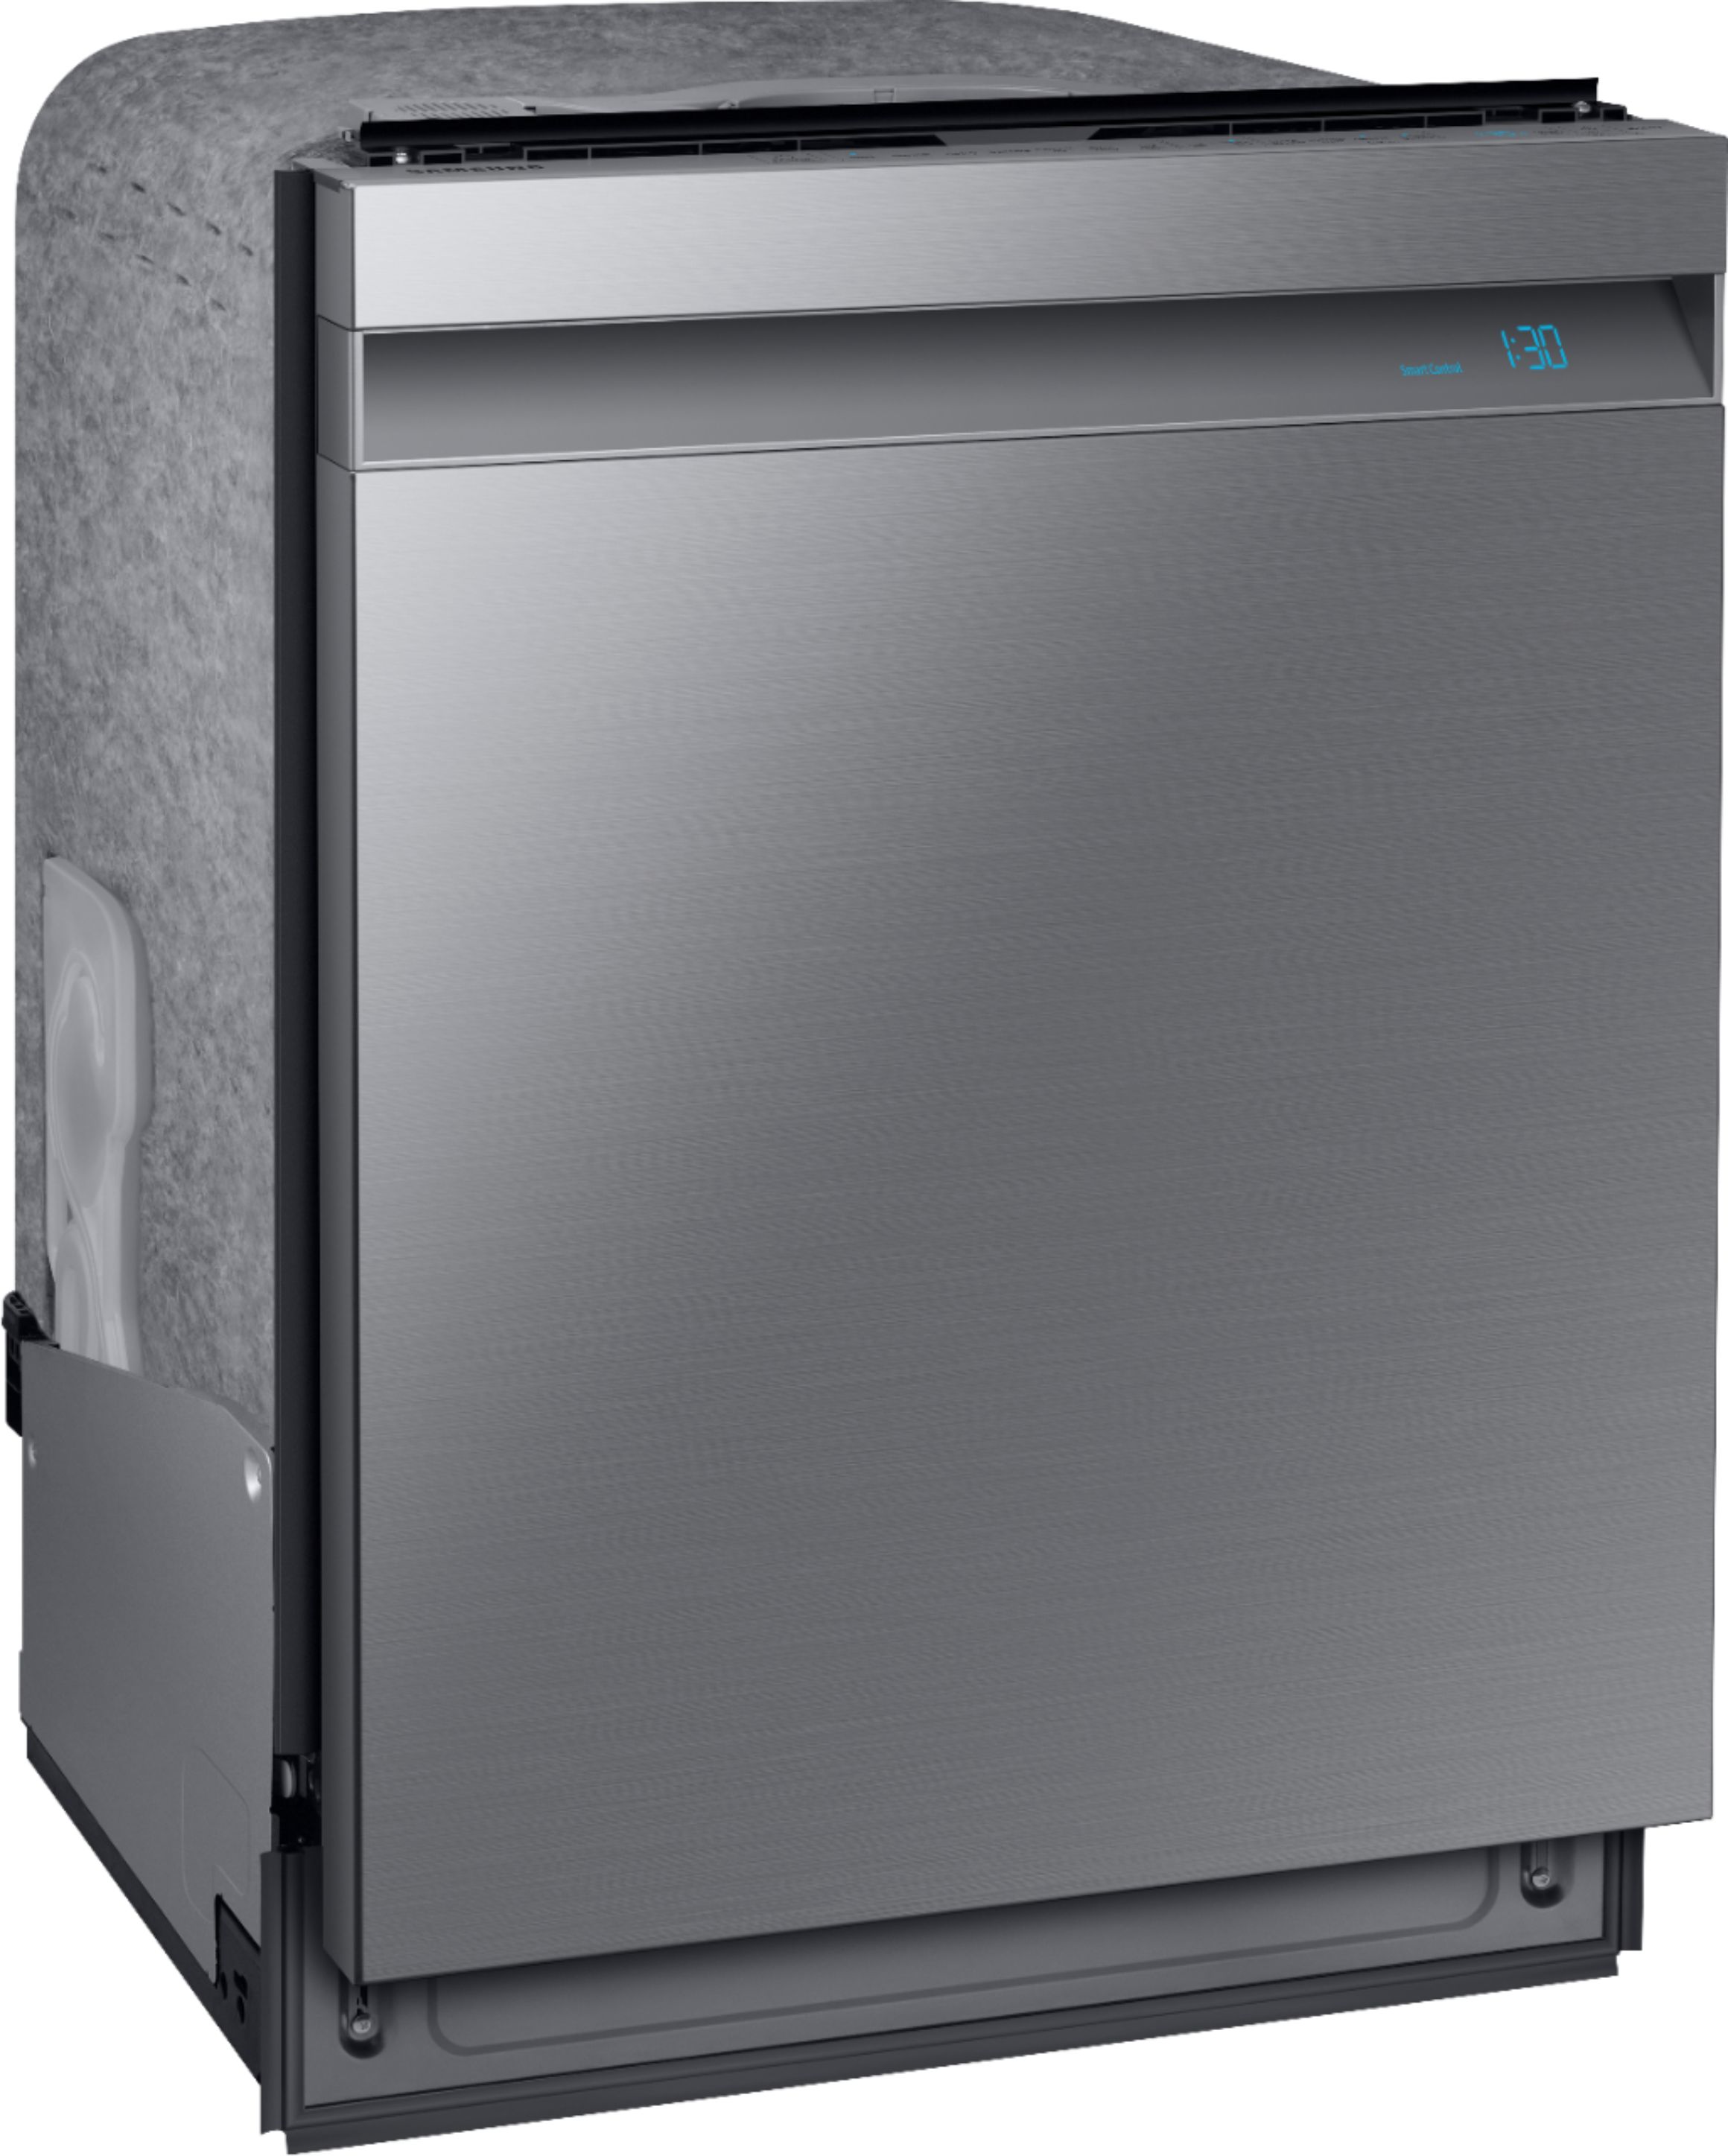 Angle View: Samsung - AutoRelease Smart Built-In Dishwasher with Linear Wash, 39dBA - Stainless Steel